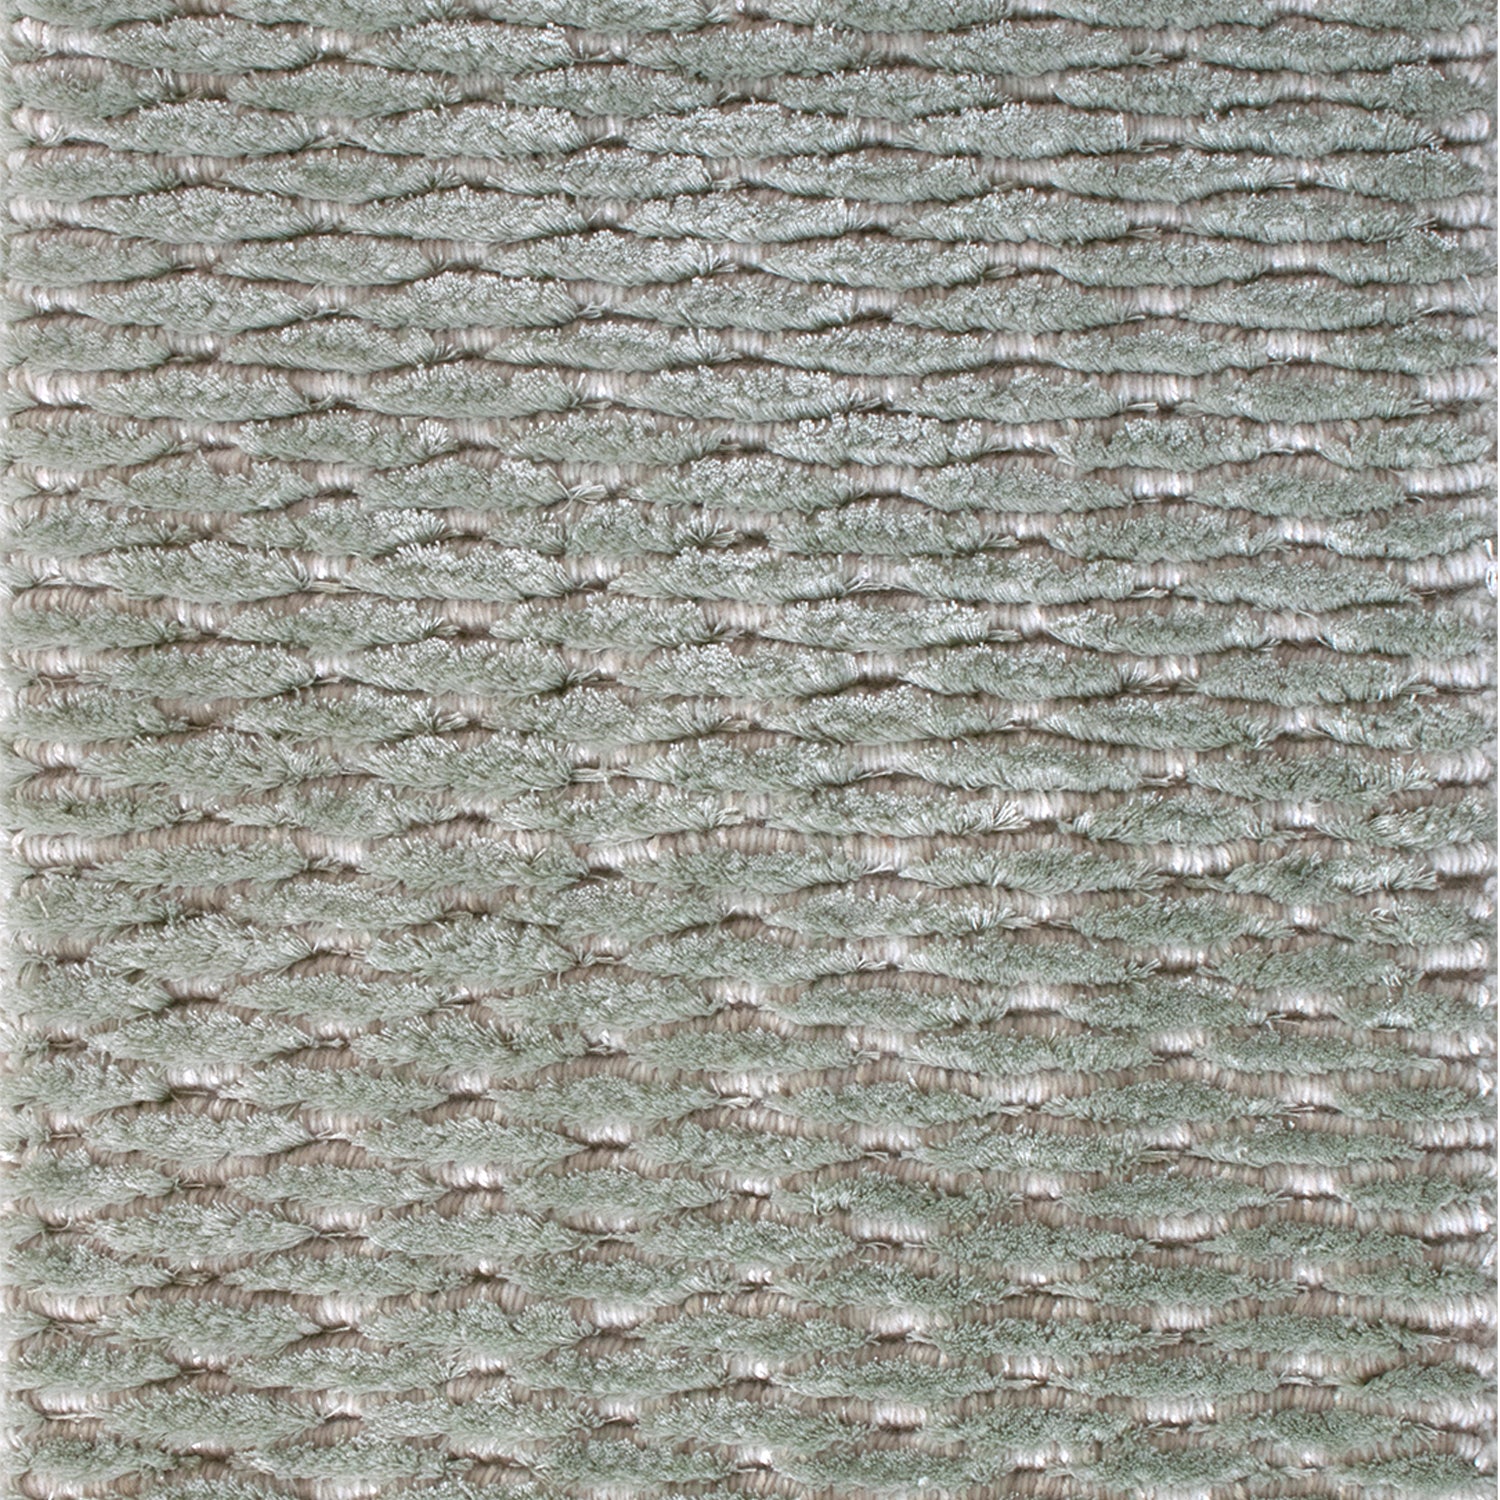 Wool-blend broadloom carpet swatch in a textured lattice print in sable on a sage field.